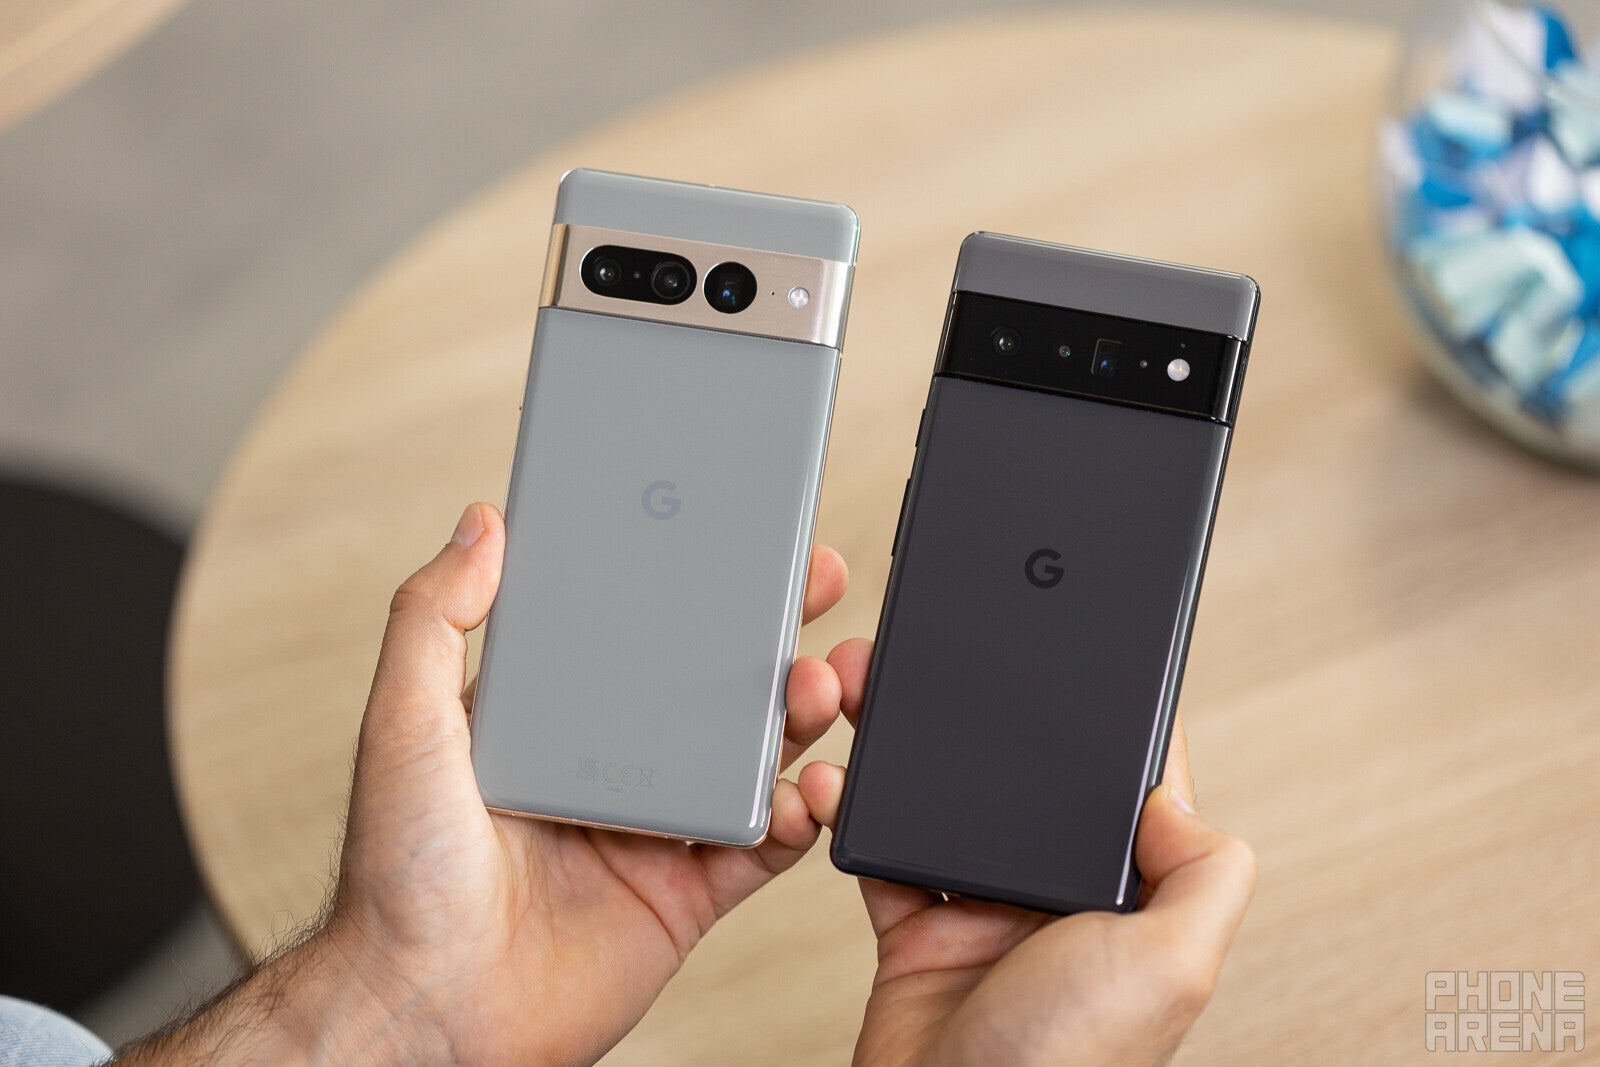 The new Pixel 7 Pro (left) alongside its predecessor - the iPhone 14 and Pixel 7 - are respectable upgrades, but will the Galaxy S23 crush it?  Here's why I'm excited about it, no matter what